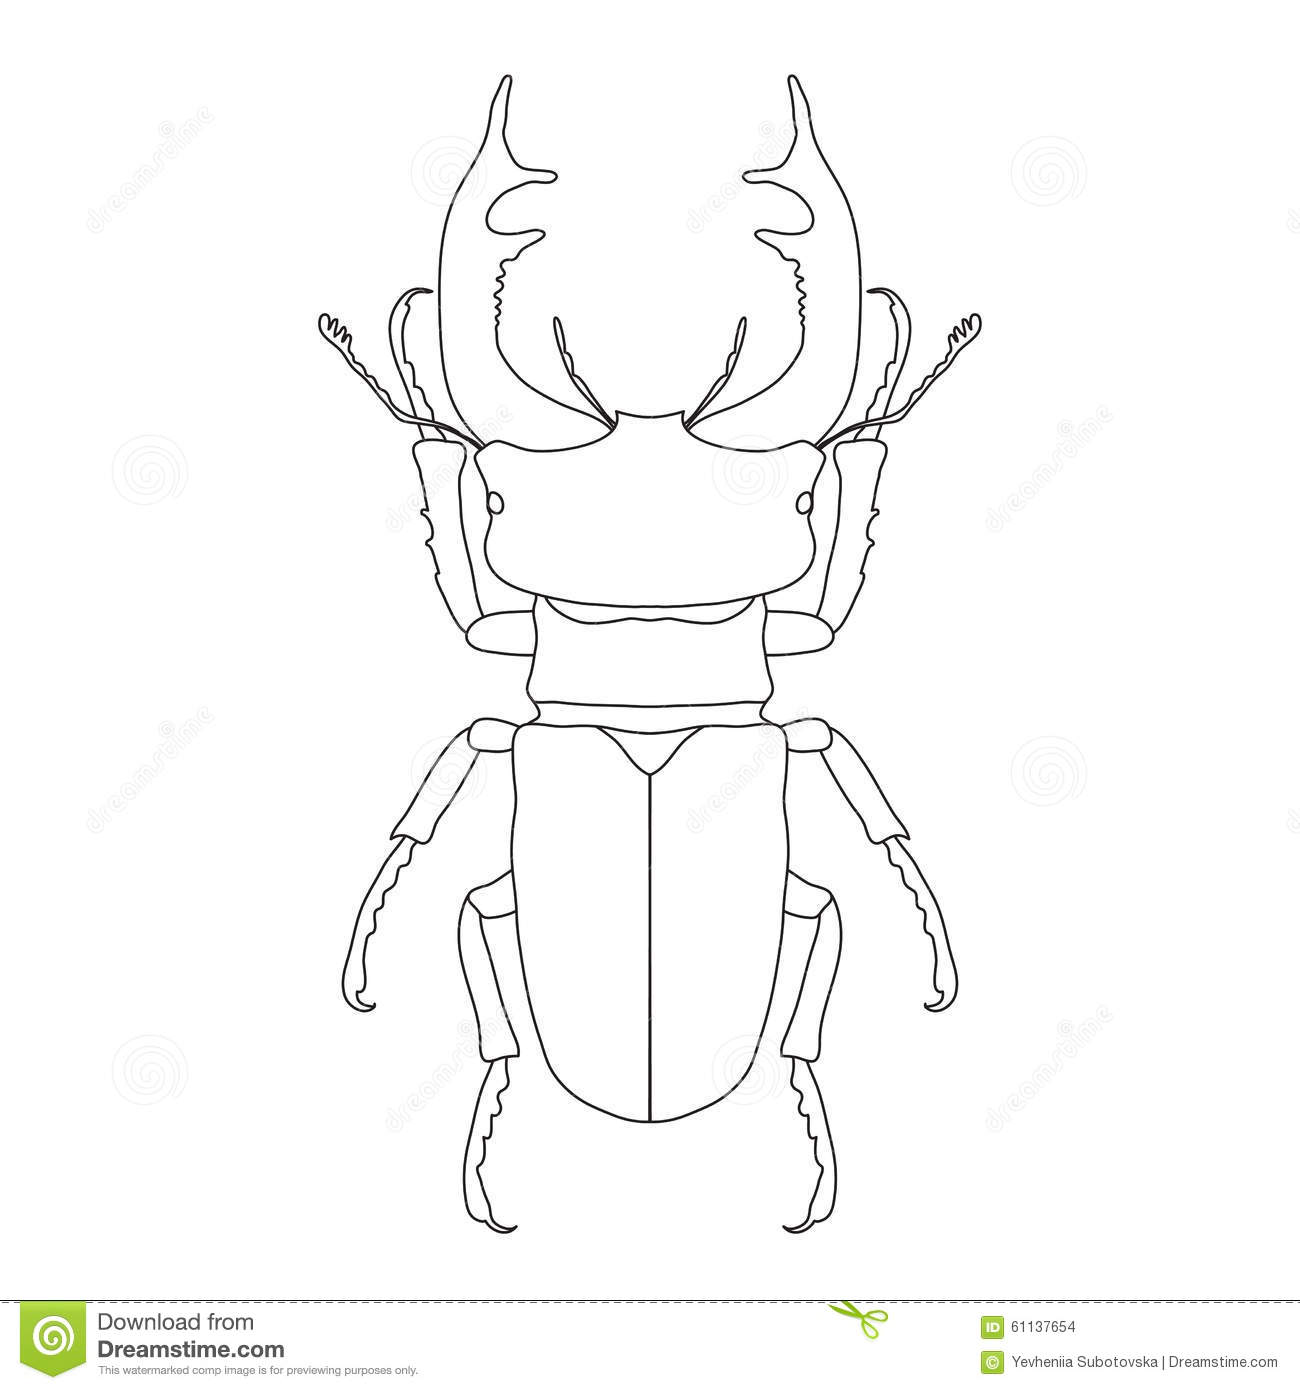 Stag Beetle coloring #17, Download drawings